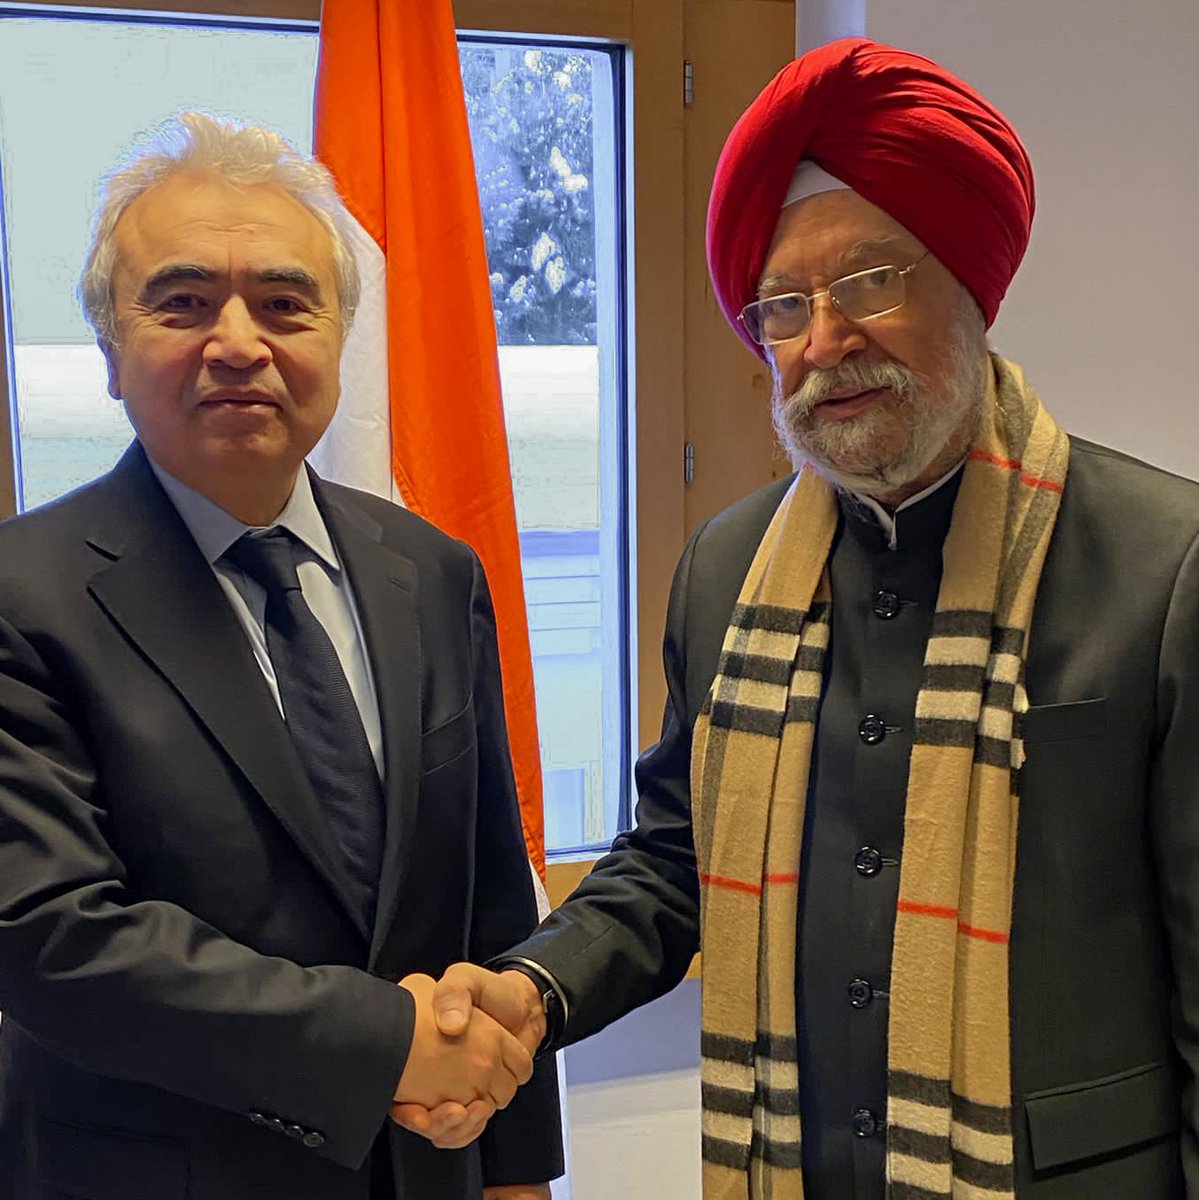 Delighted to meet with my friend Indian Minister @HardeepSPuri at #WEF24 to discuss global energy markets & the outlook for biofuels. Looking forward to welcoming Minister Puri at next month's @IEA Ministerial in Paris & to further strengthening the IEA-🇮🇳 relationship.